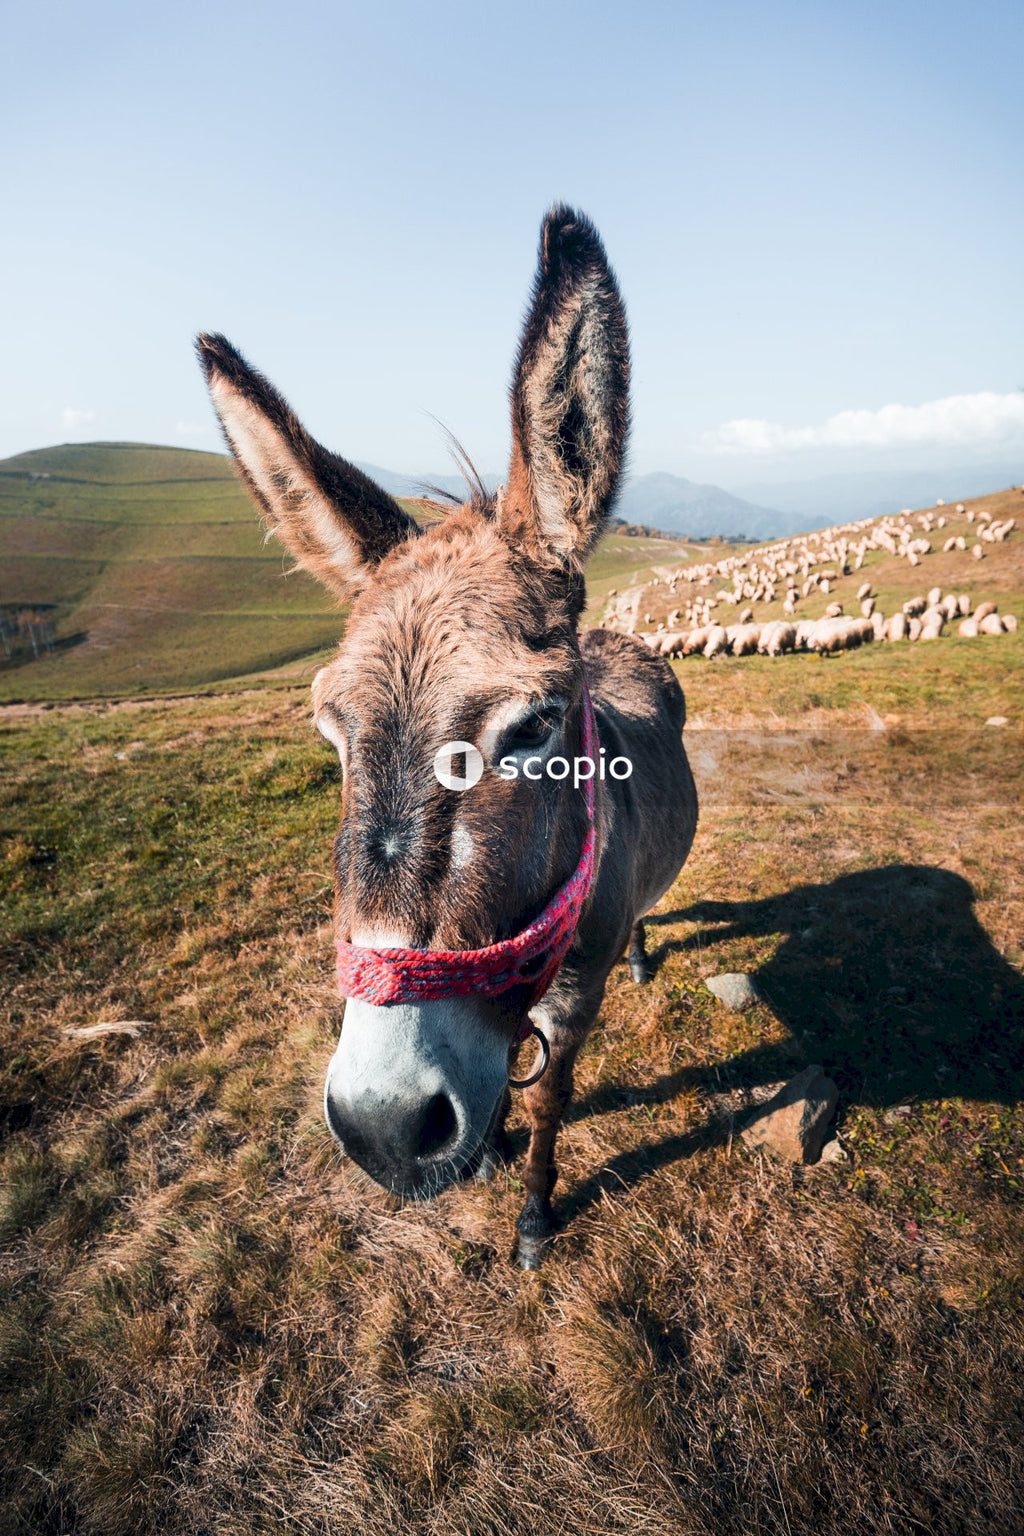 Donkey standing on mountain meadow with herd of sheep behind